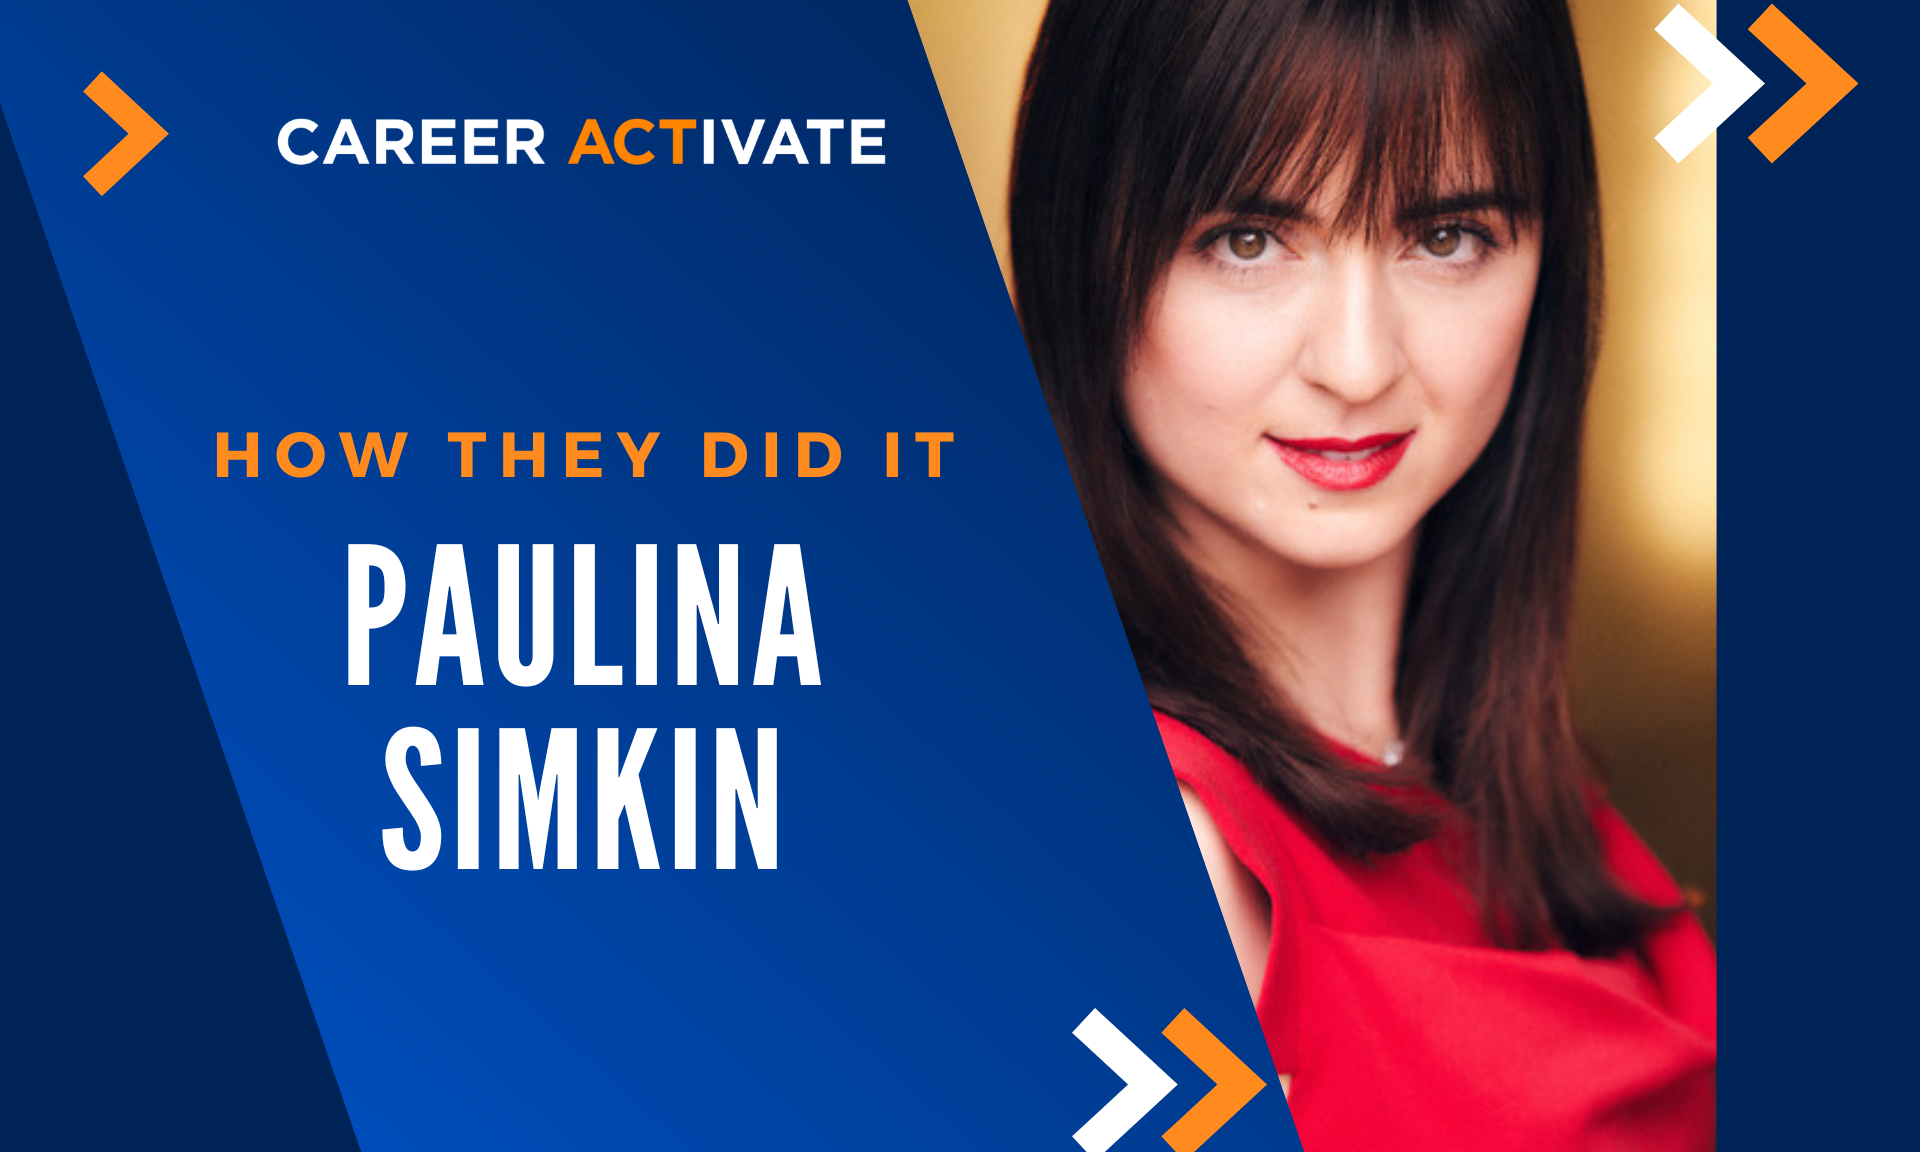 Booking 8 Jobs in 8 Months: “How They Did It” with Paulina Simkin